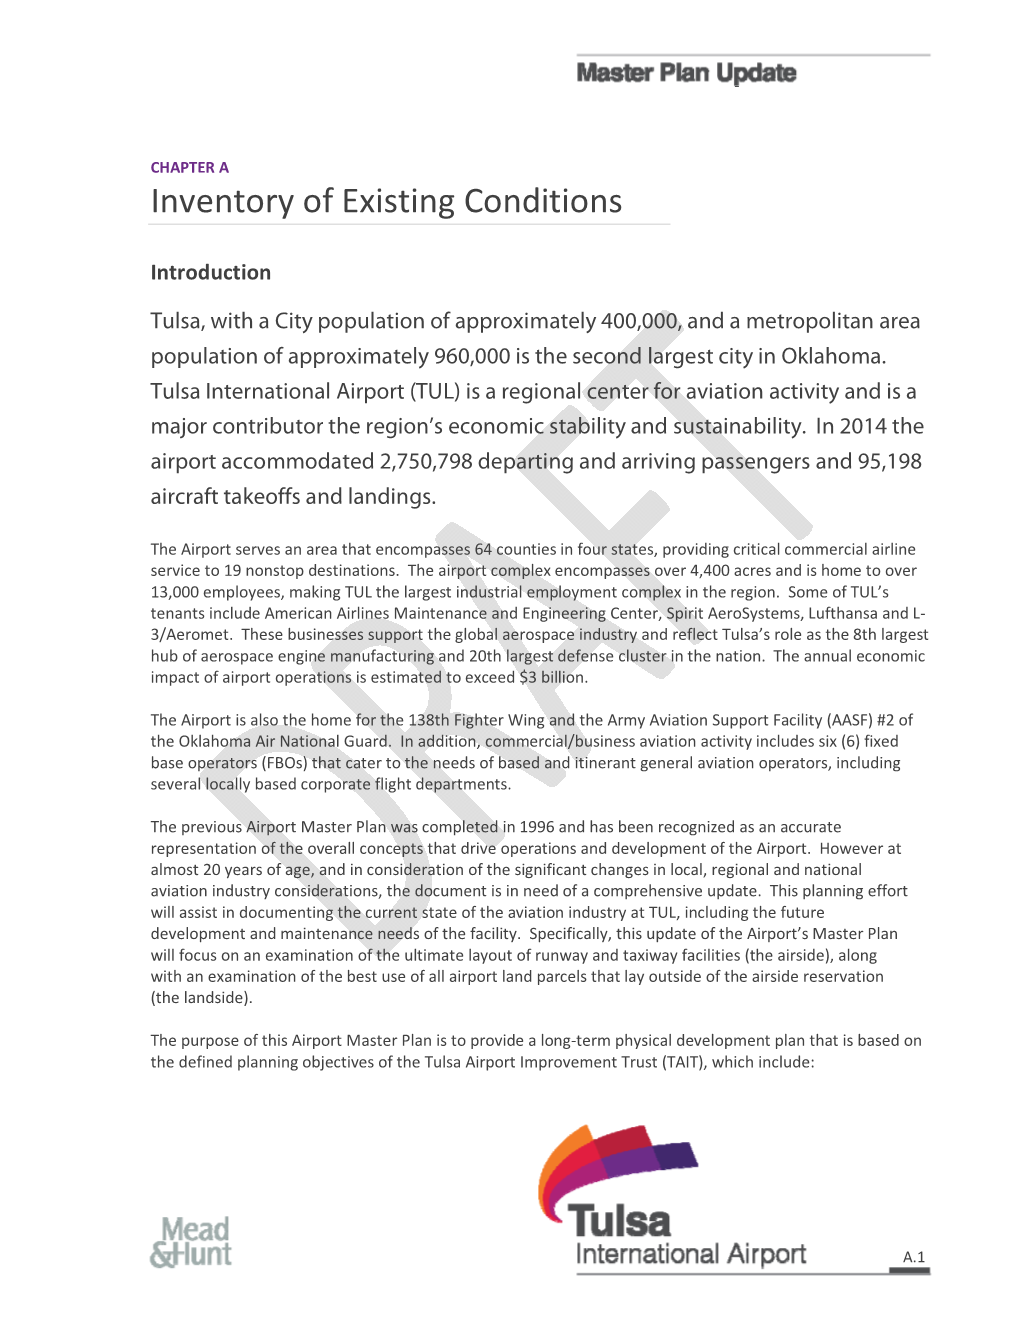 Inventory of Existing Conditions